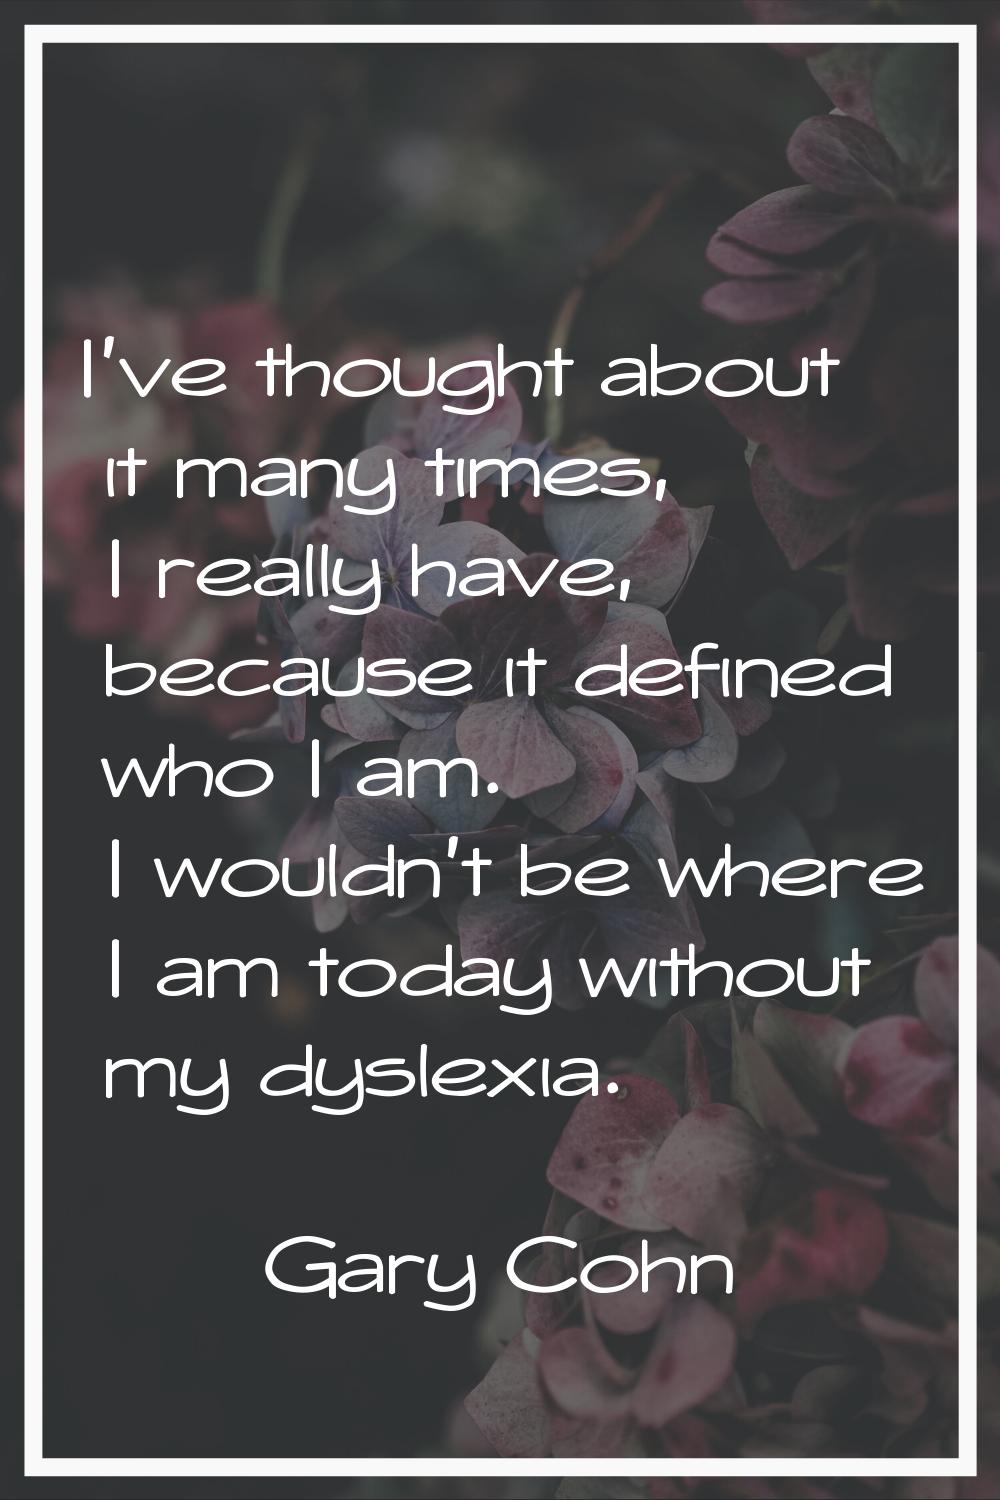 I've thought about it many times, I really have, because it defined who I am. I wouldn't be where I